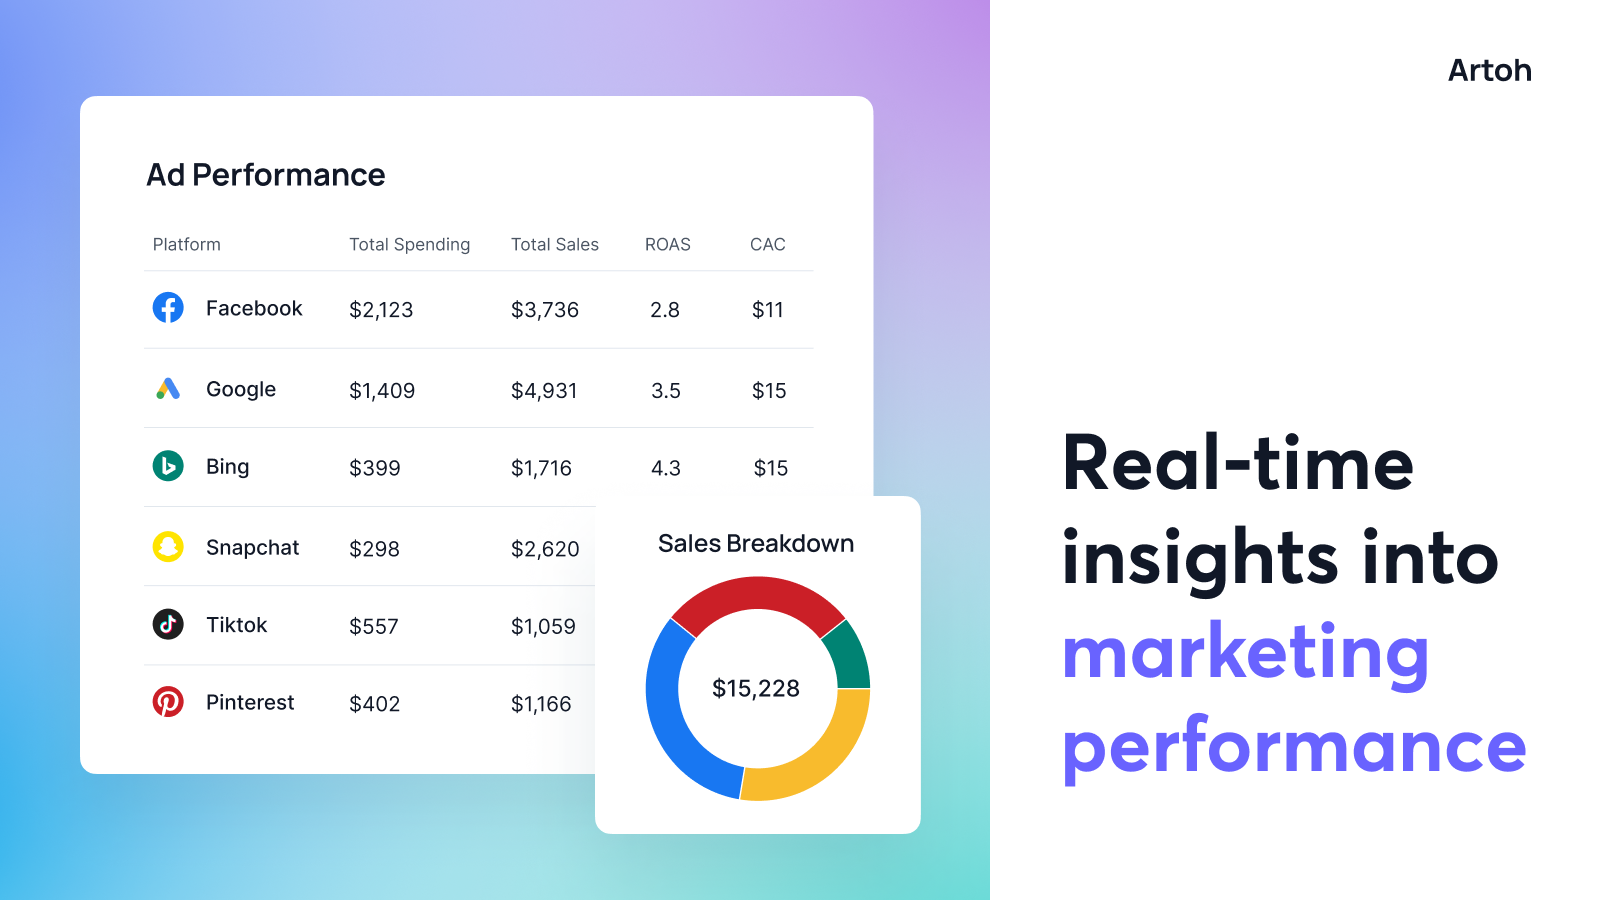 View Ad Performance in one place